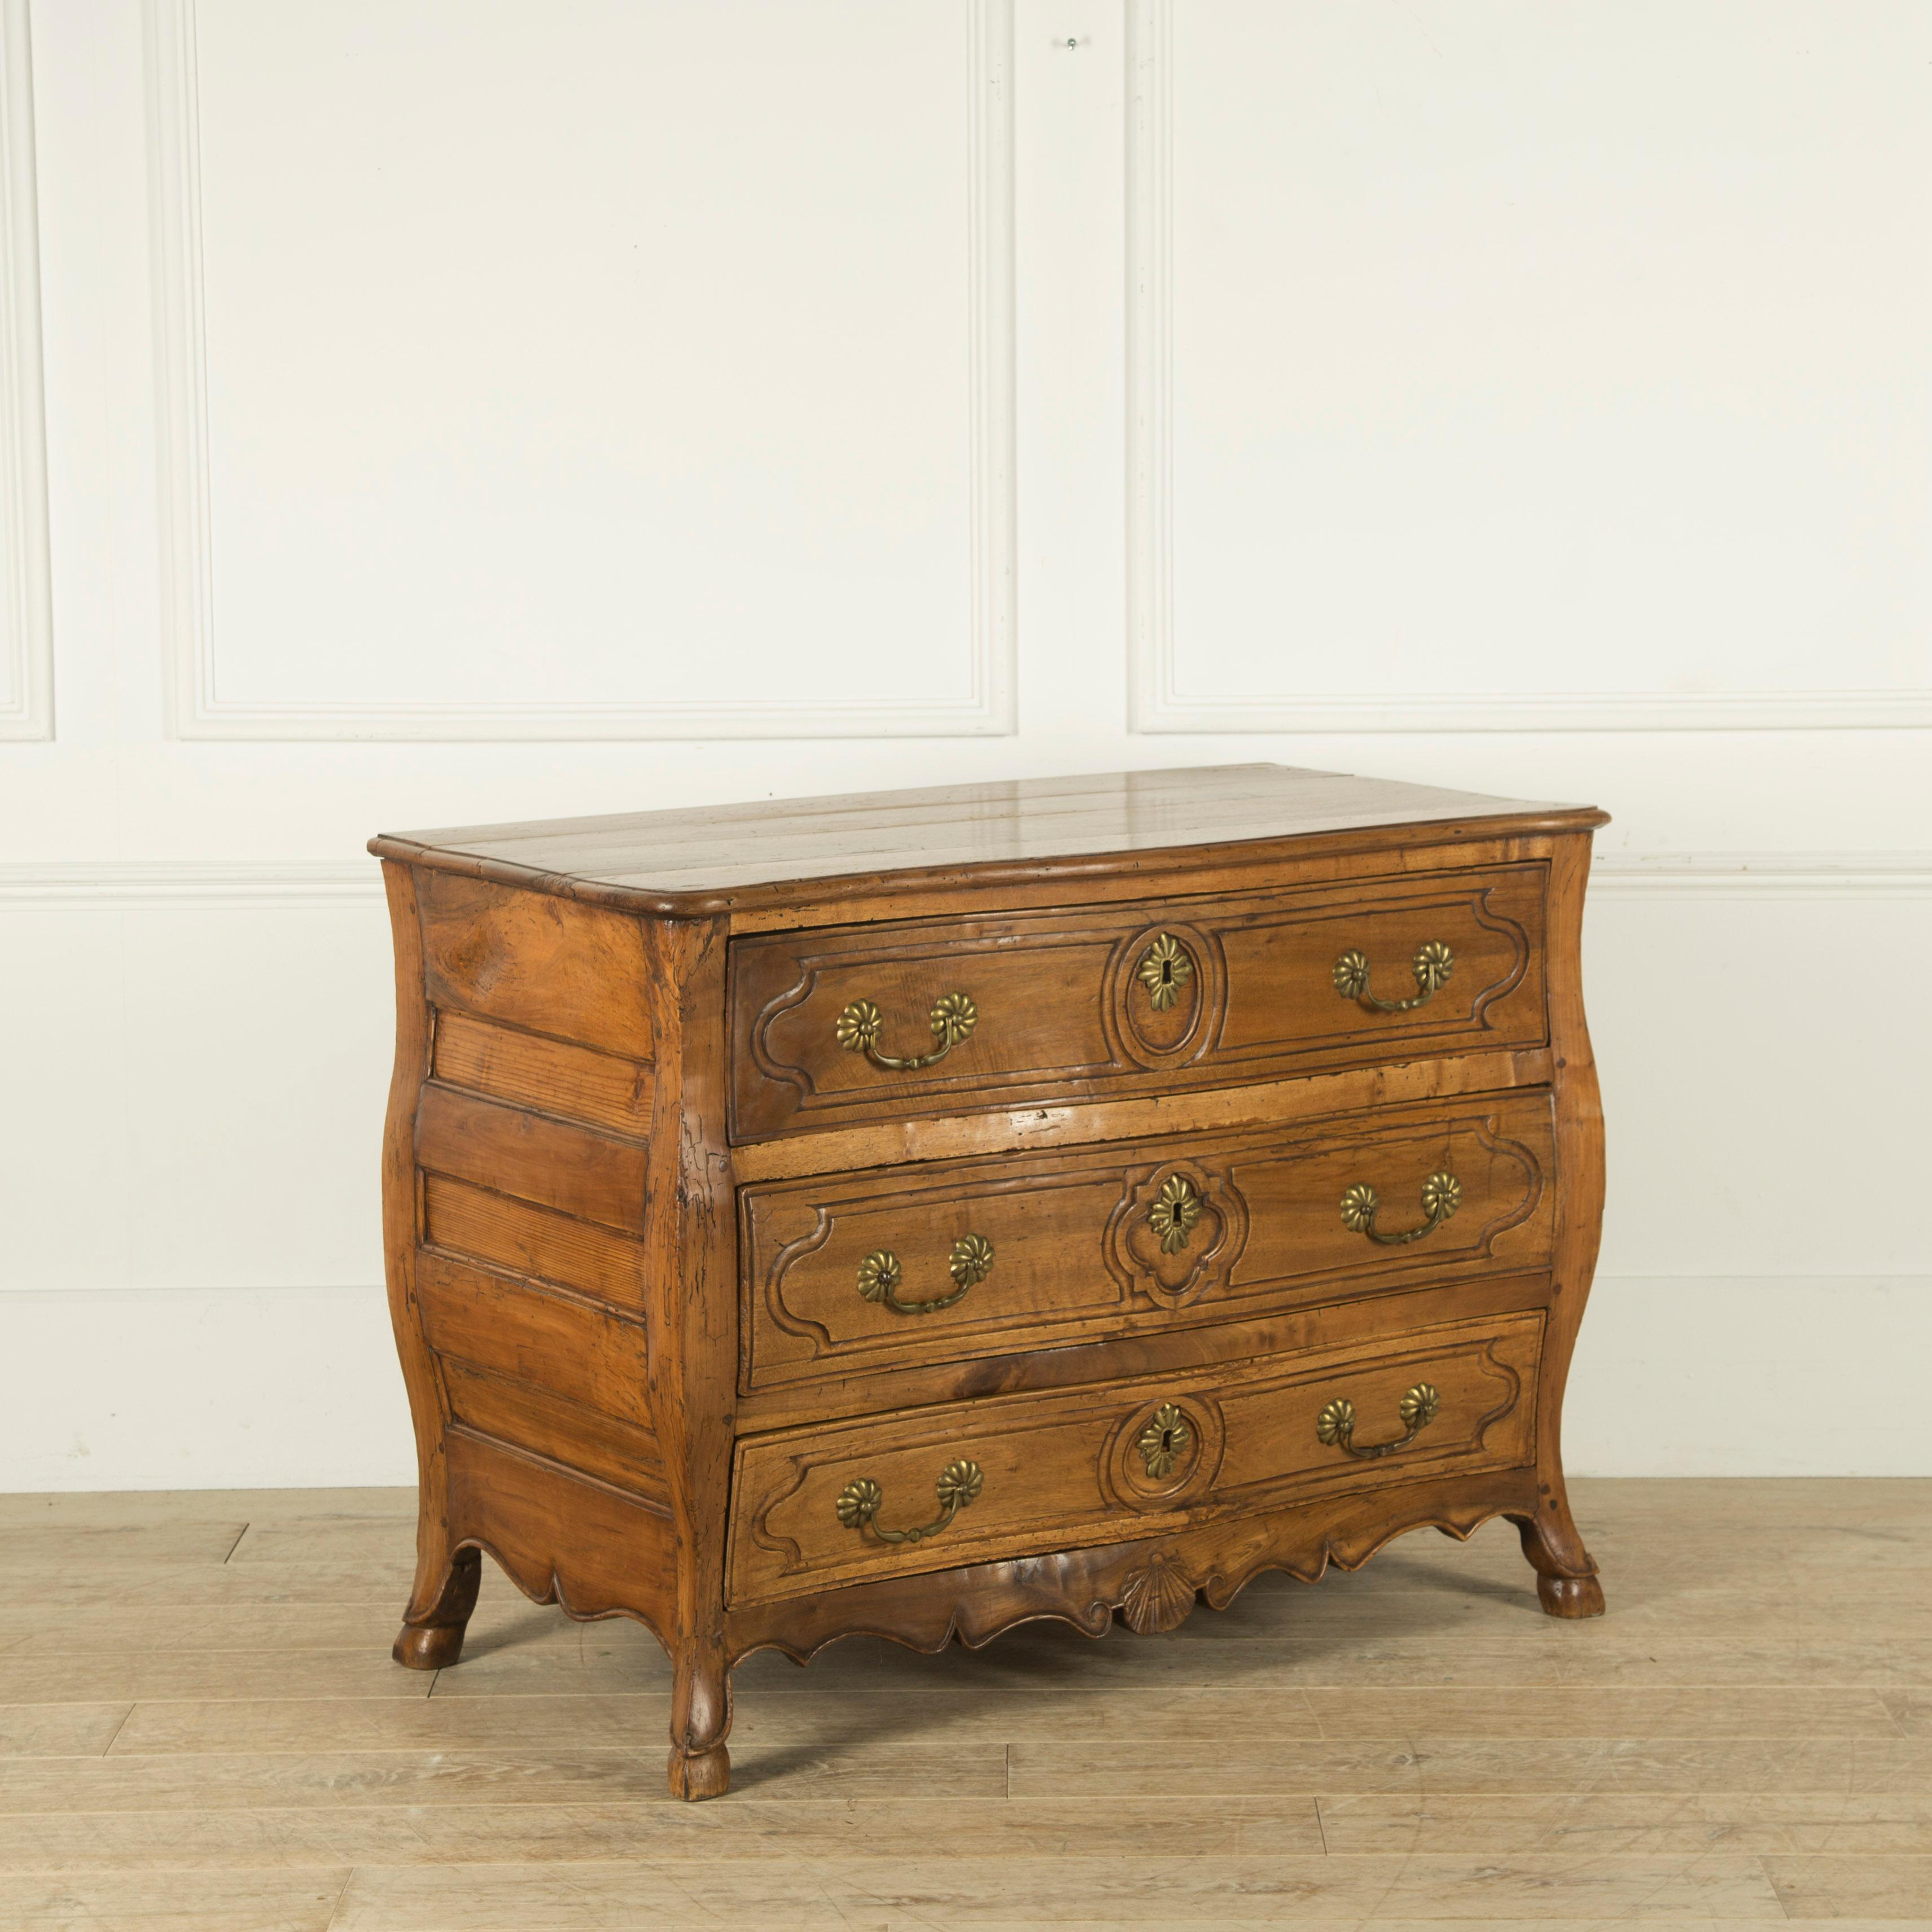 A French fruitwood three-drawer commode with bombe front and sides, circa 1820.